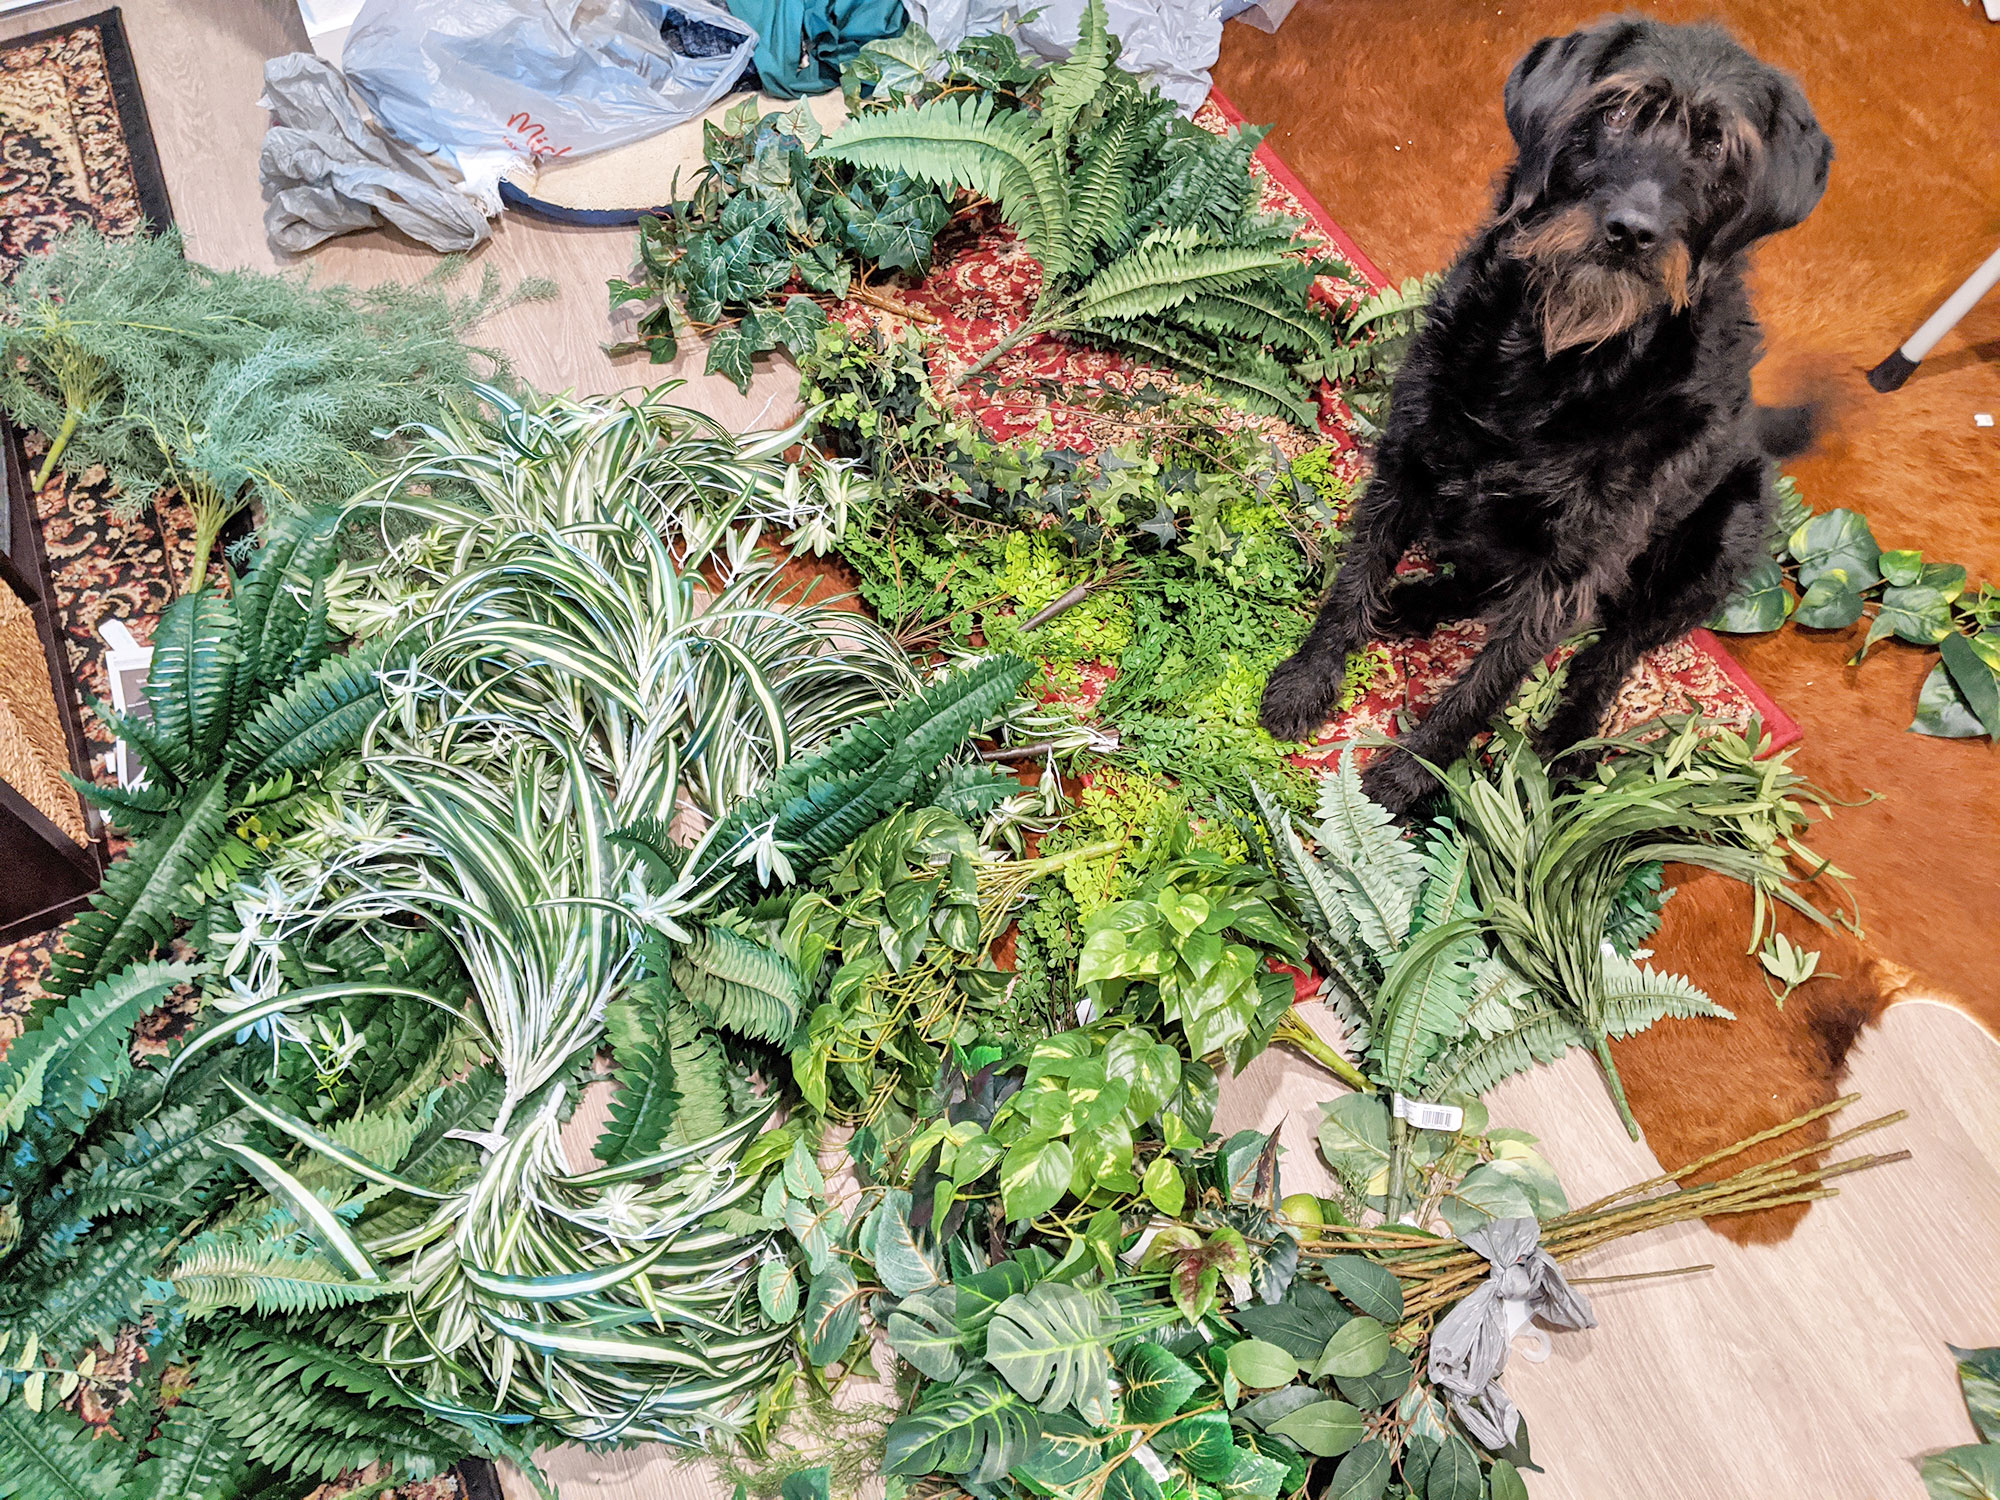 Ingrid the labradoodle looking very confused by the amount of faux green plants in the apartment.